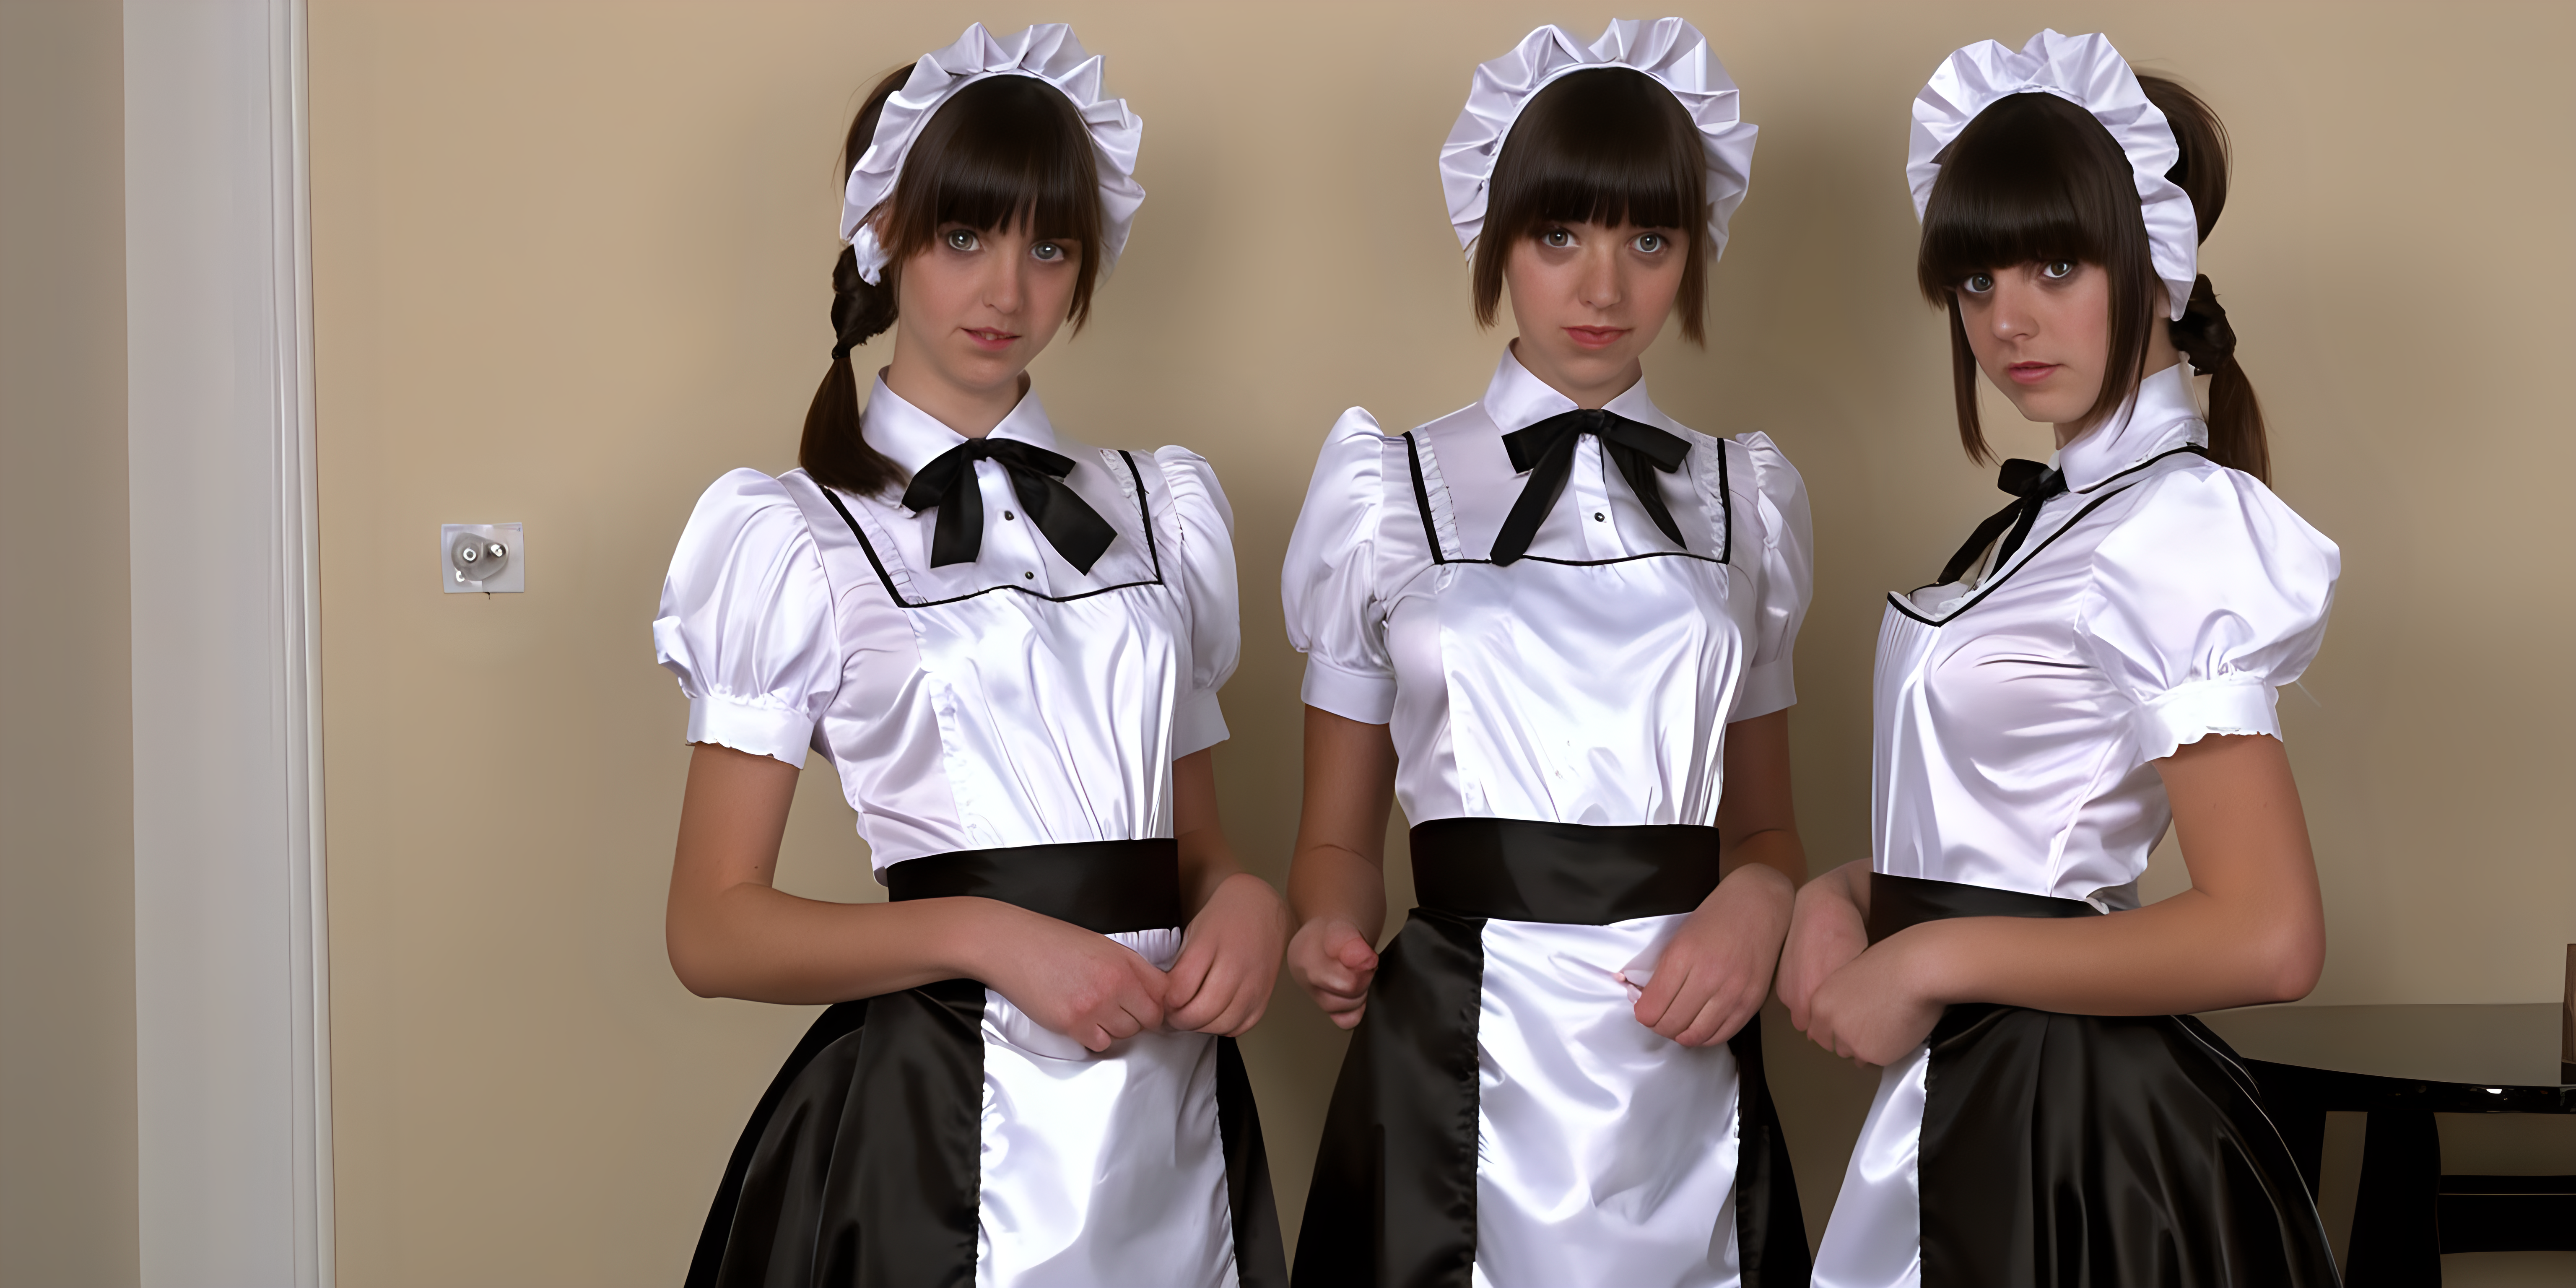 Two girls in satin long maid uniforms